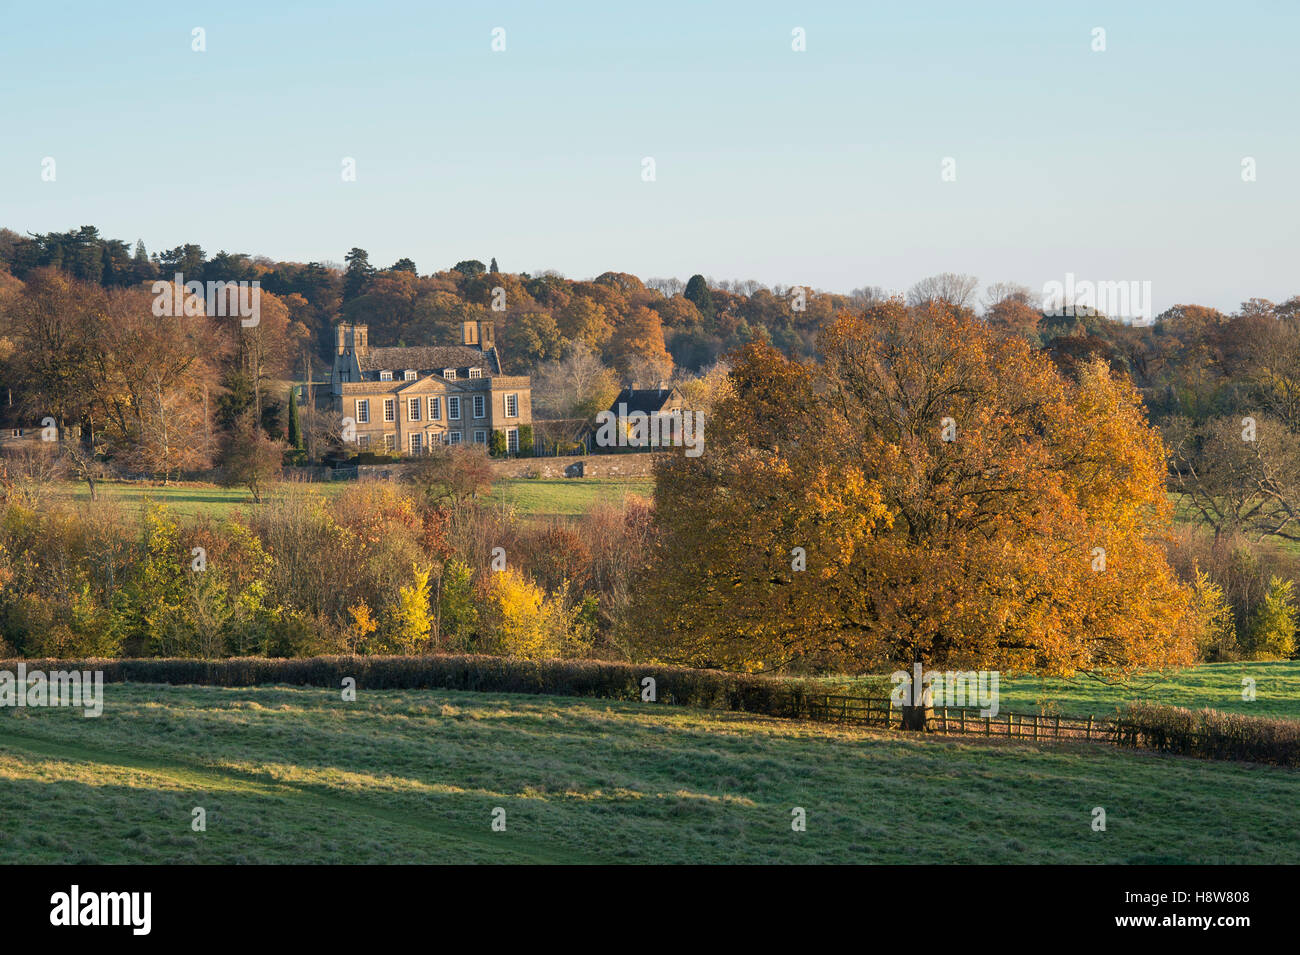 Bourton house in autumn at sunrise. Bourton on the hill, Cotswolds, Gloucestershire, England. Stock Photo